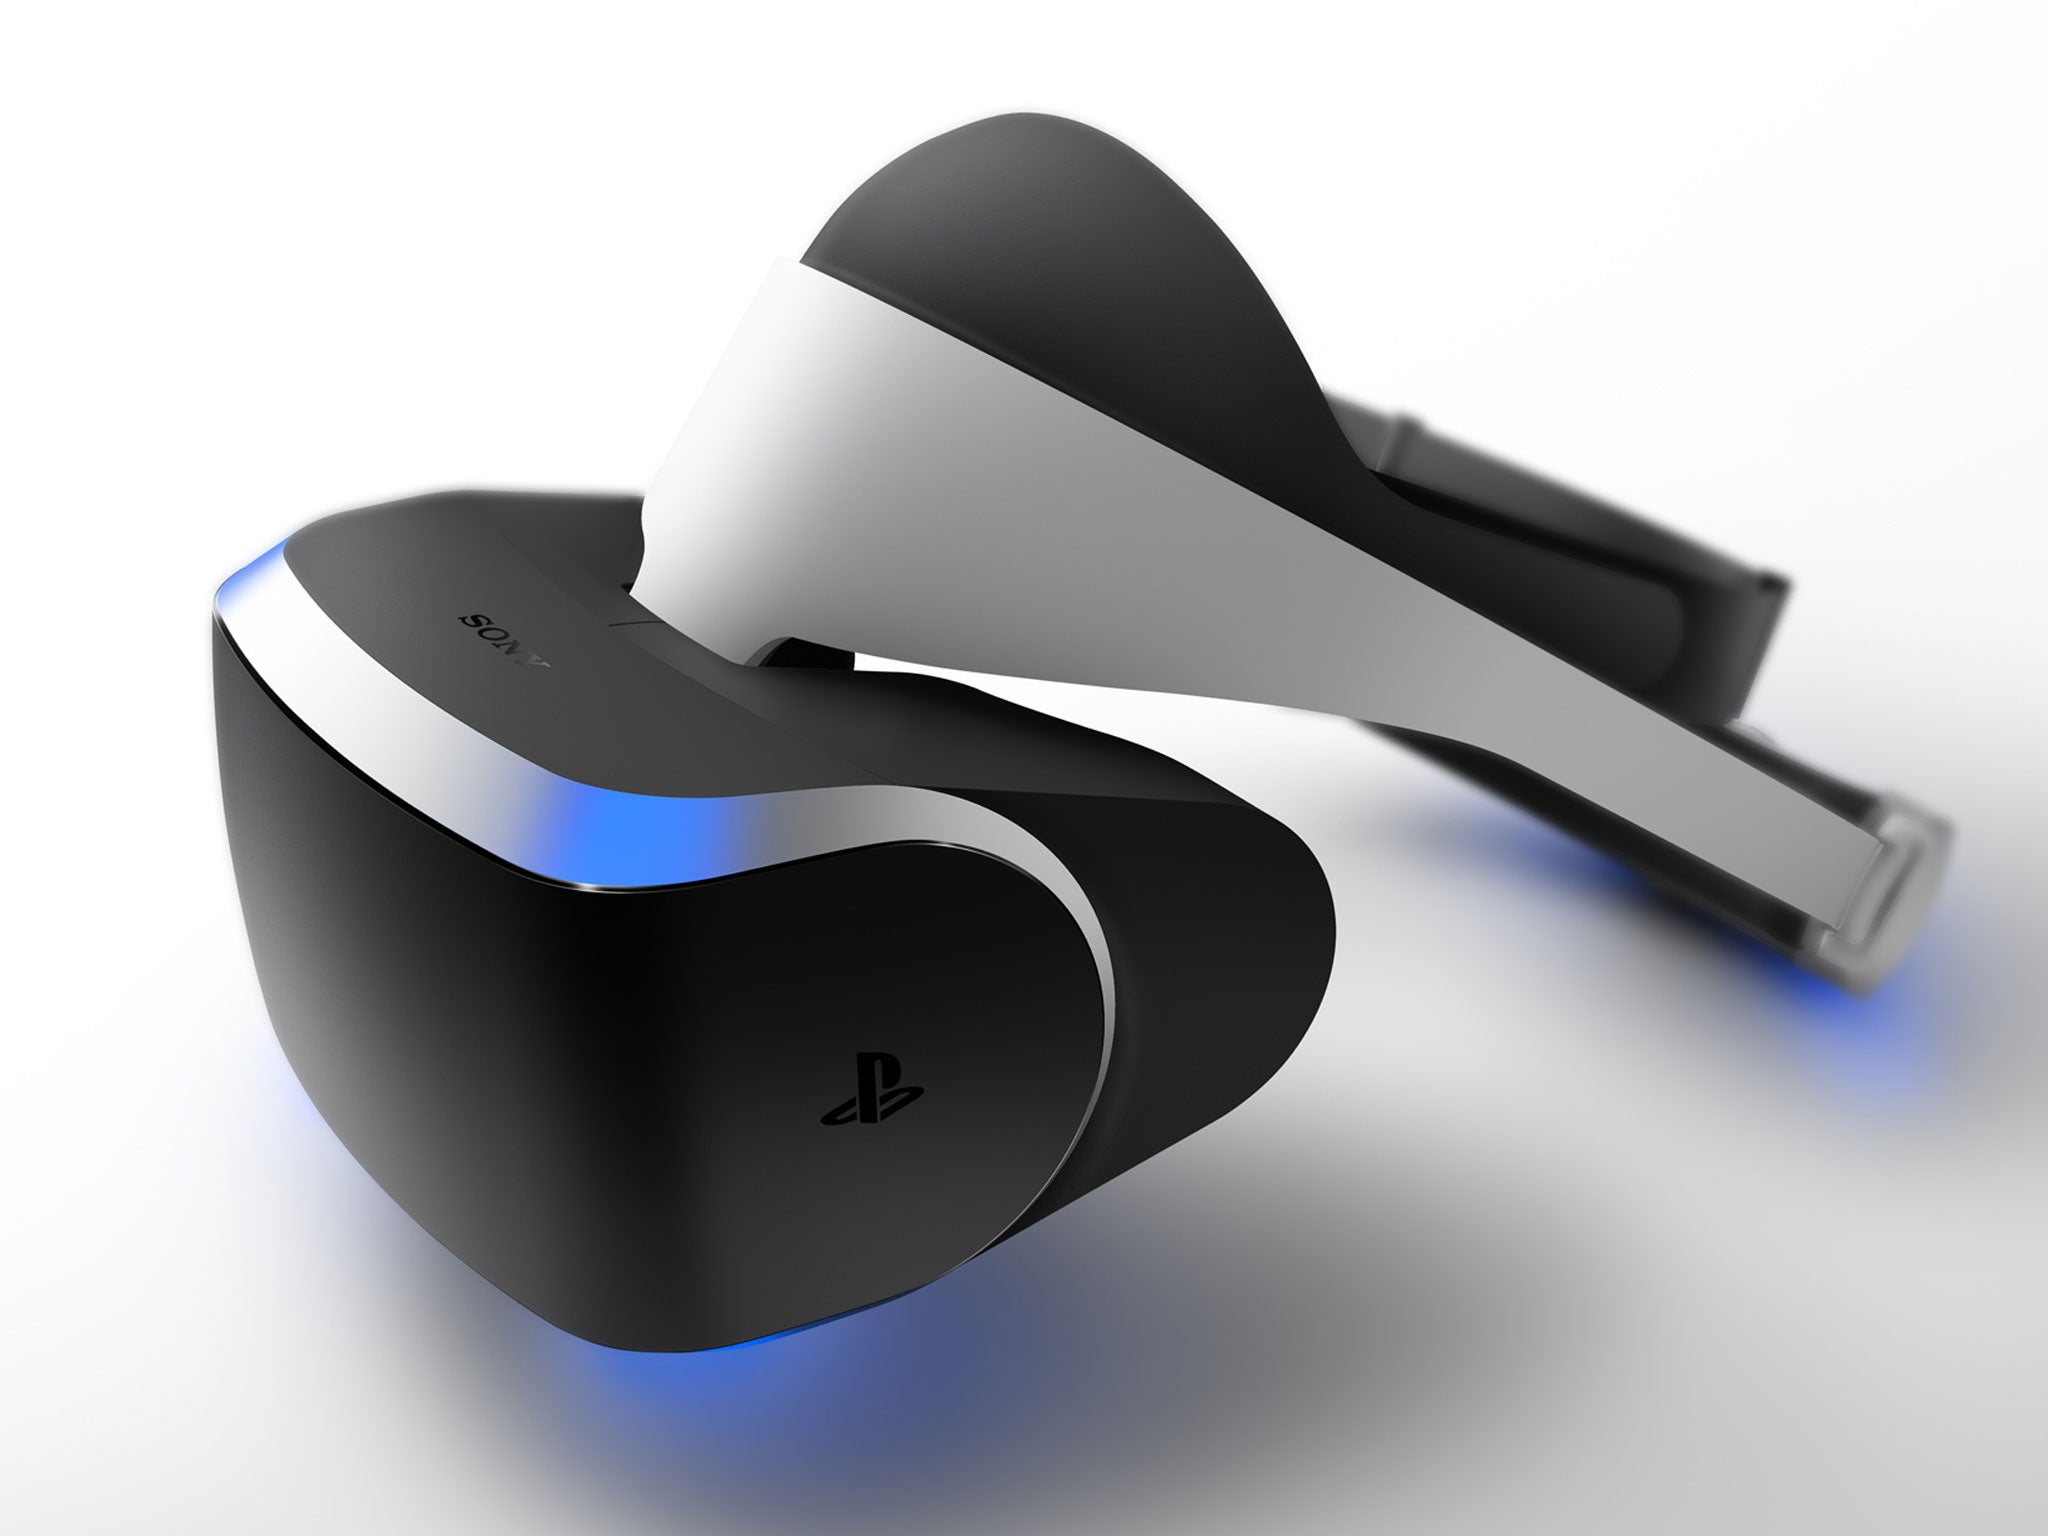 The prototype version of Sony's virtual reality headset, Project Morpheus